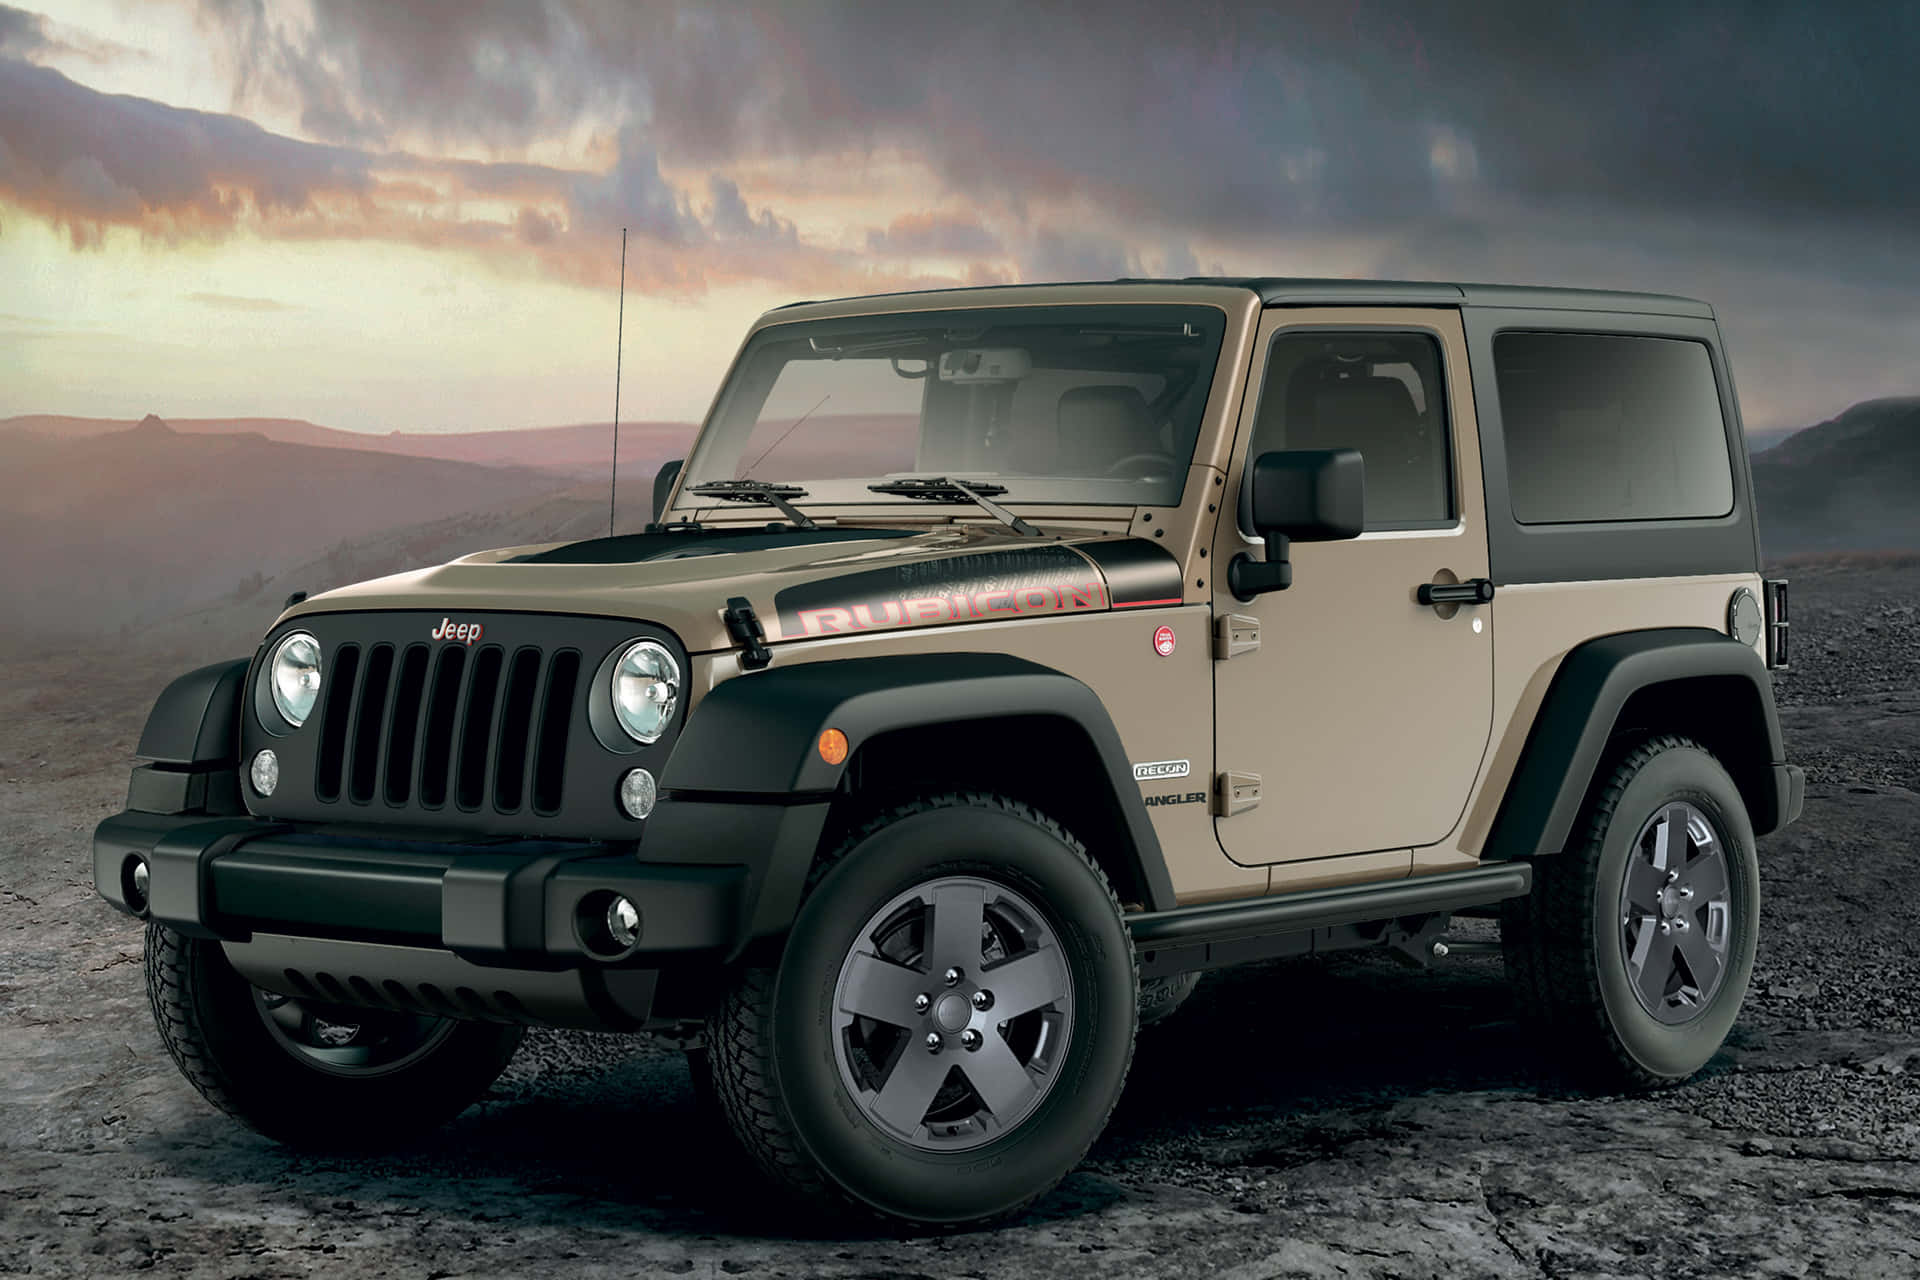 Cruise in Style with a Jeep Wrangler